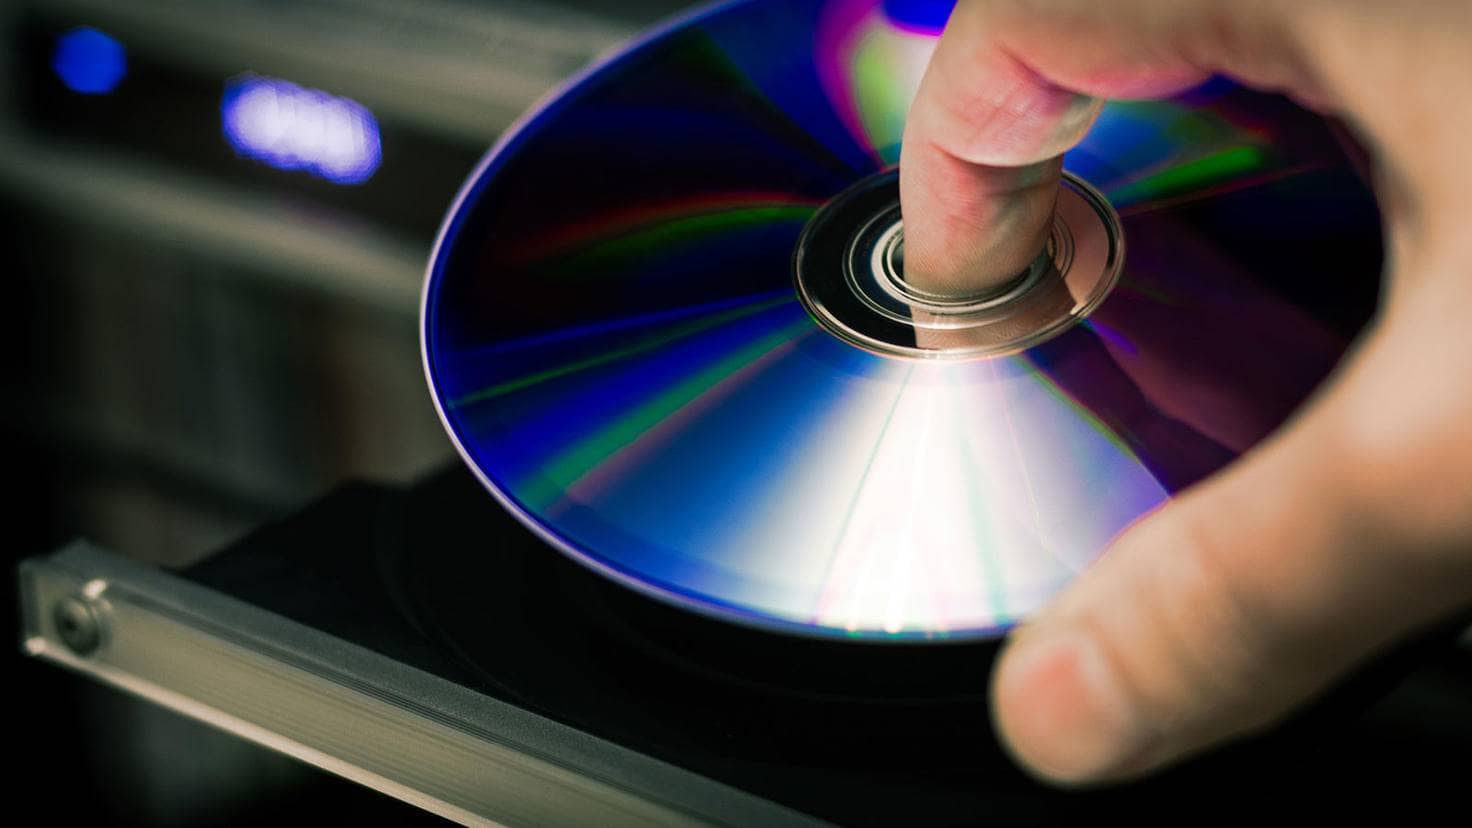 Clean dirty CDs and drives - that's how it works.